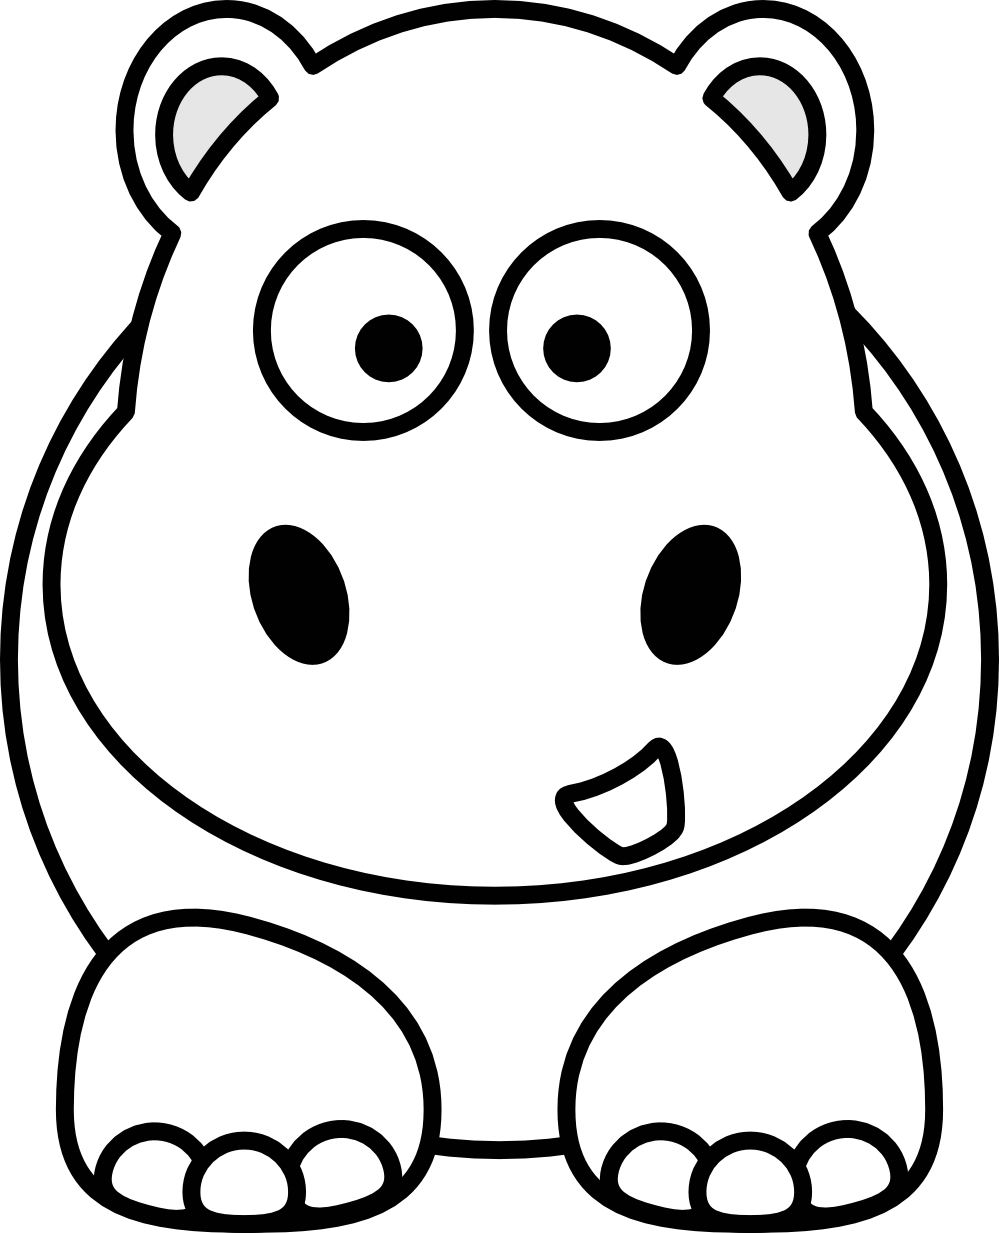 Cartoon Animals Black And White Pictures 5 HD Wallpapers | amagico.com